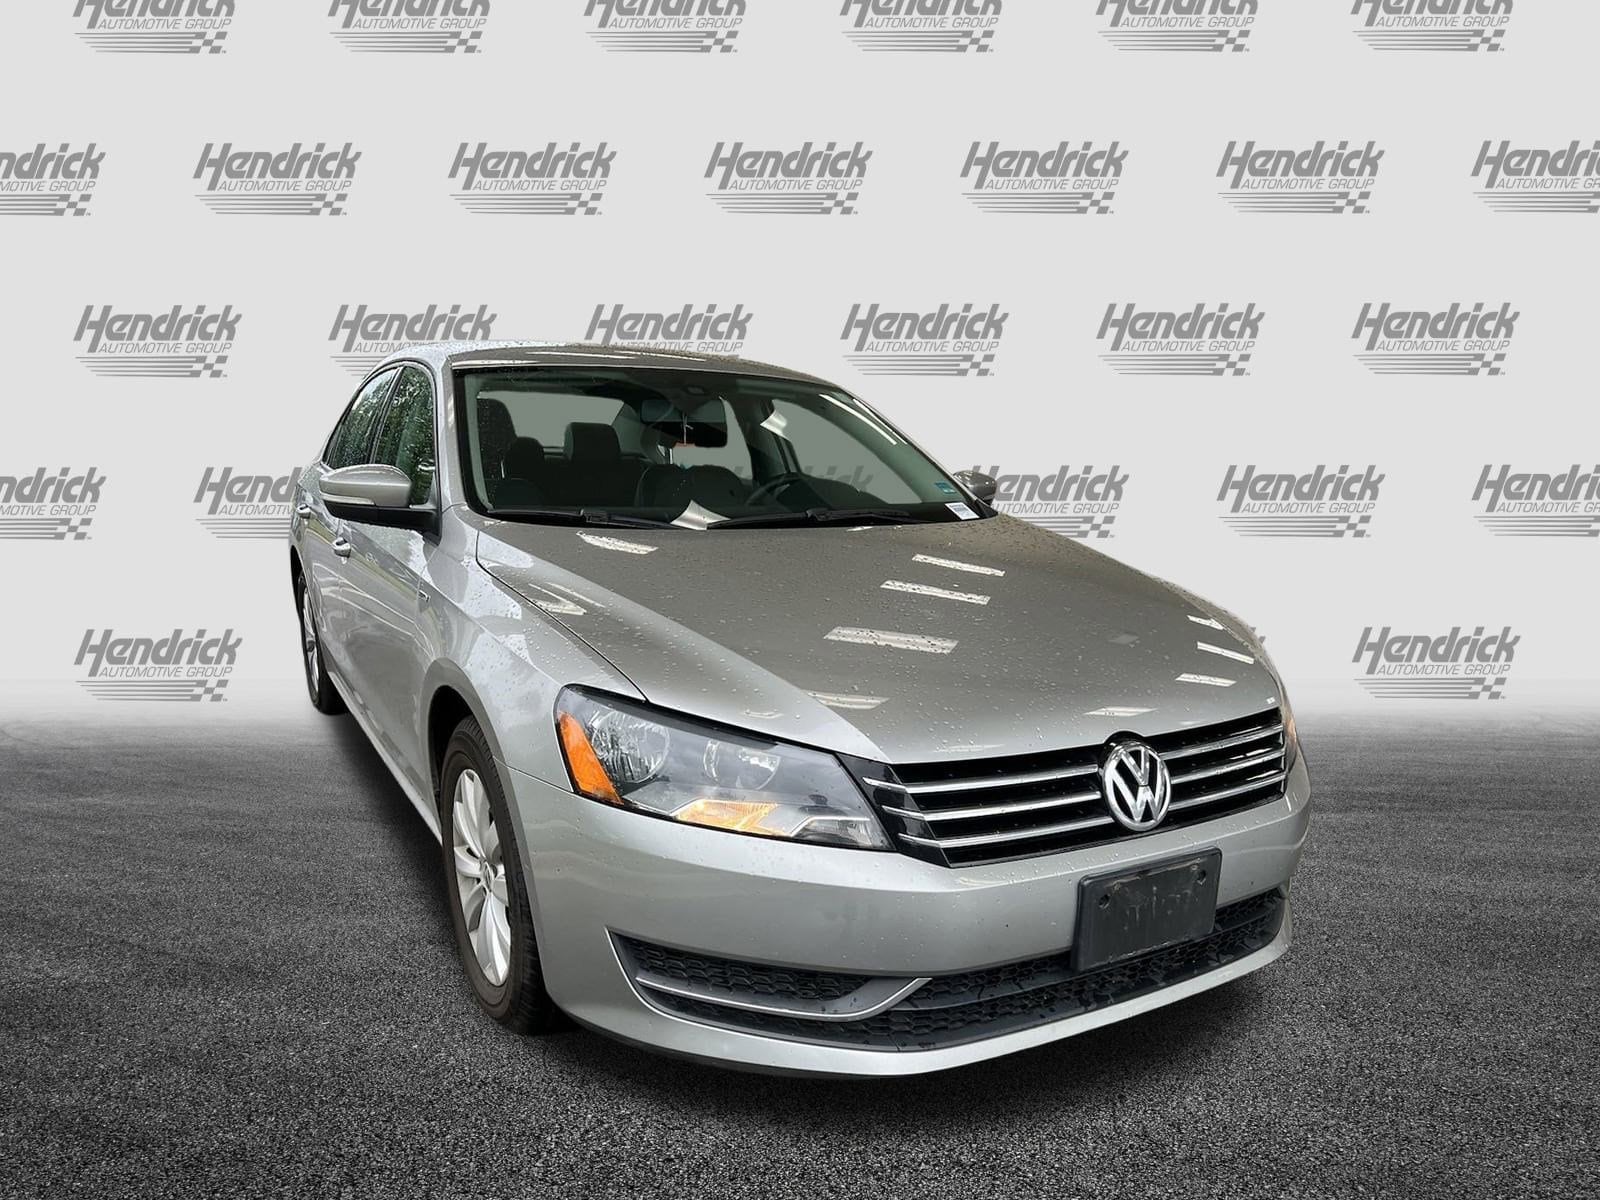 Used 2014 Volkswagen Passat S with VIN 1VWAT7A35EC093744 for sale in Charlotte, NC